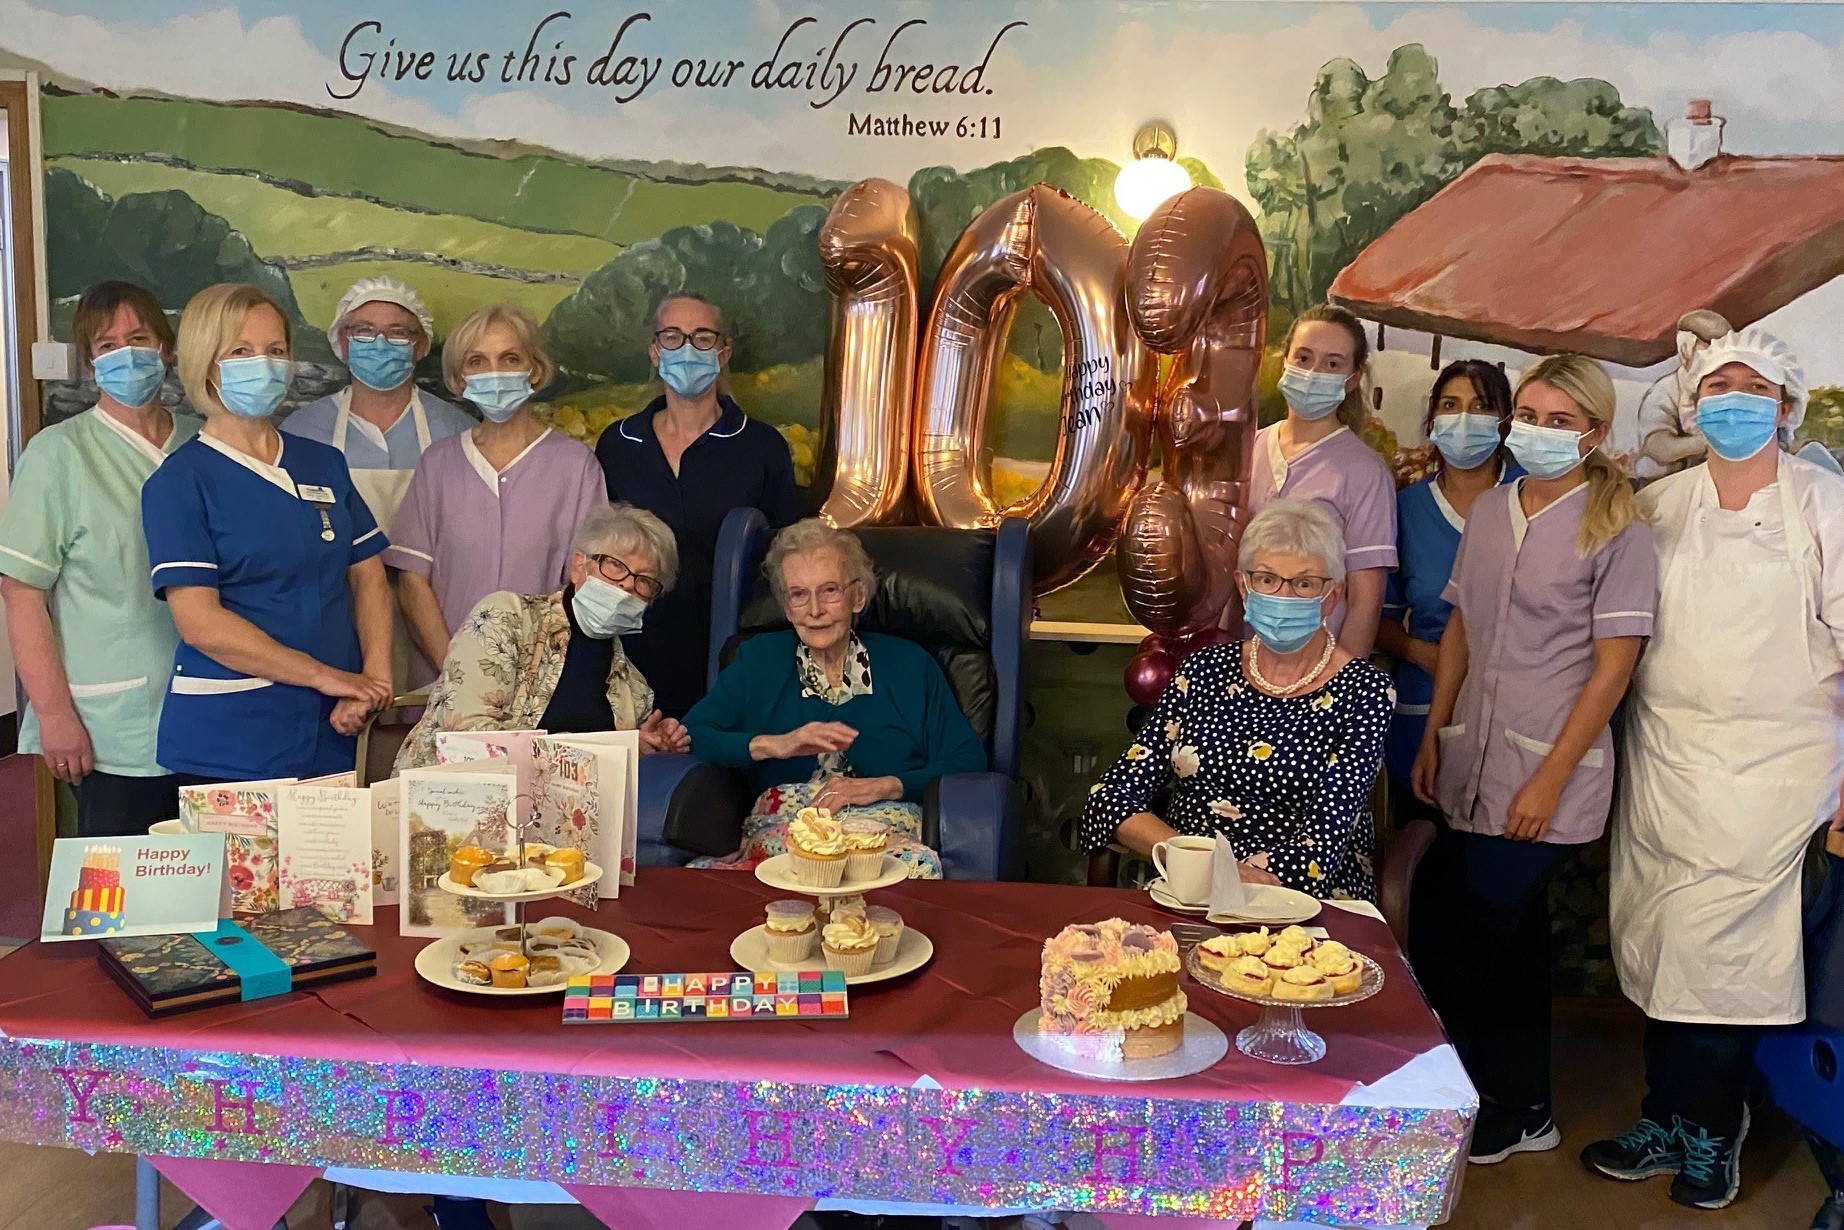 Jean celebrates 103rd birthday with loved ones – and beautiful buns!